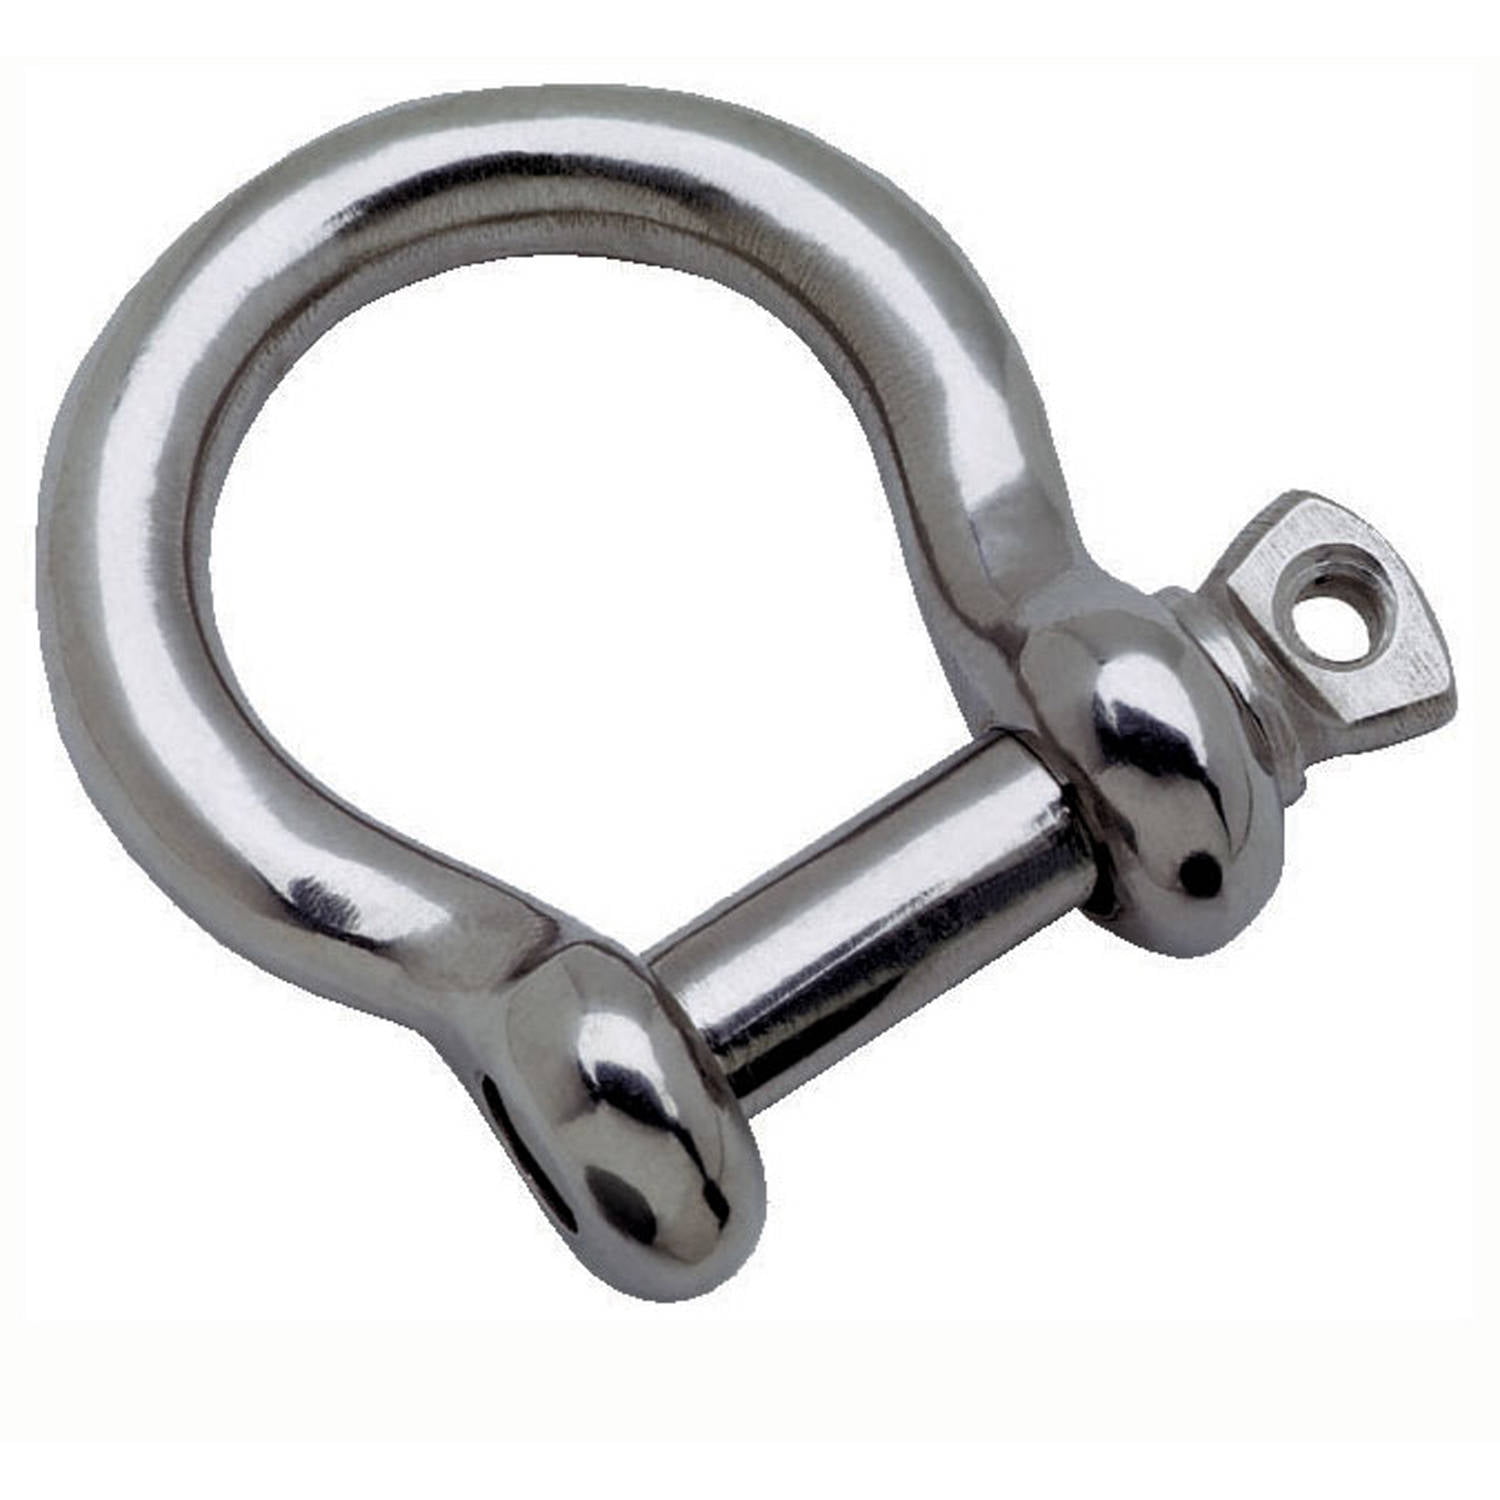 2 off 16mm Galvanized Commercial Pattern Dee Shackles 